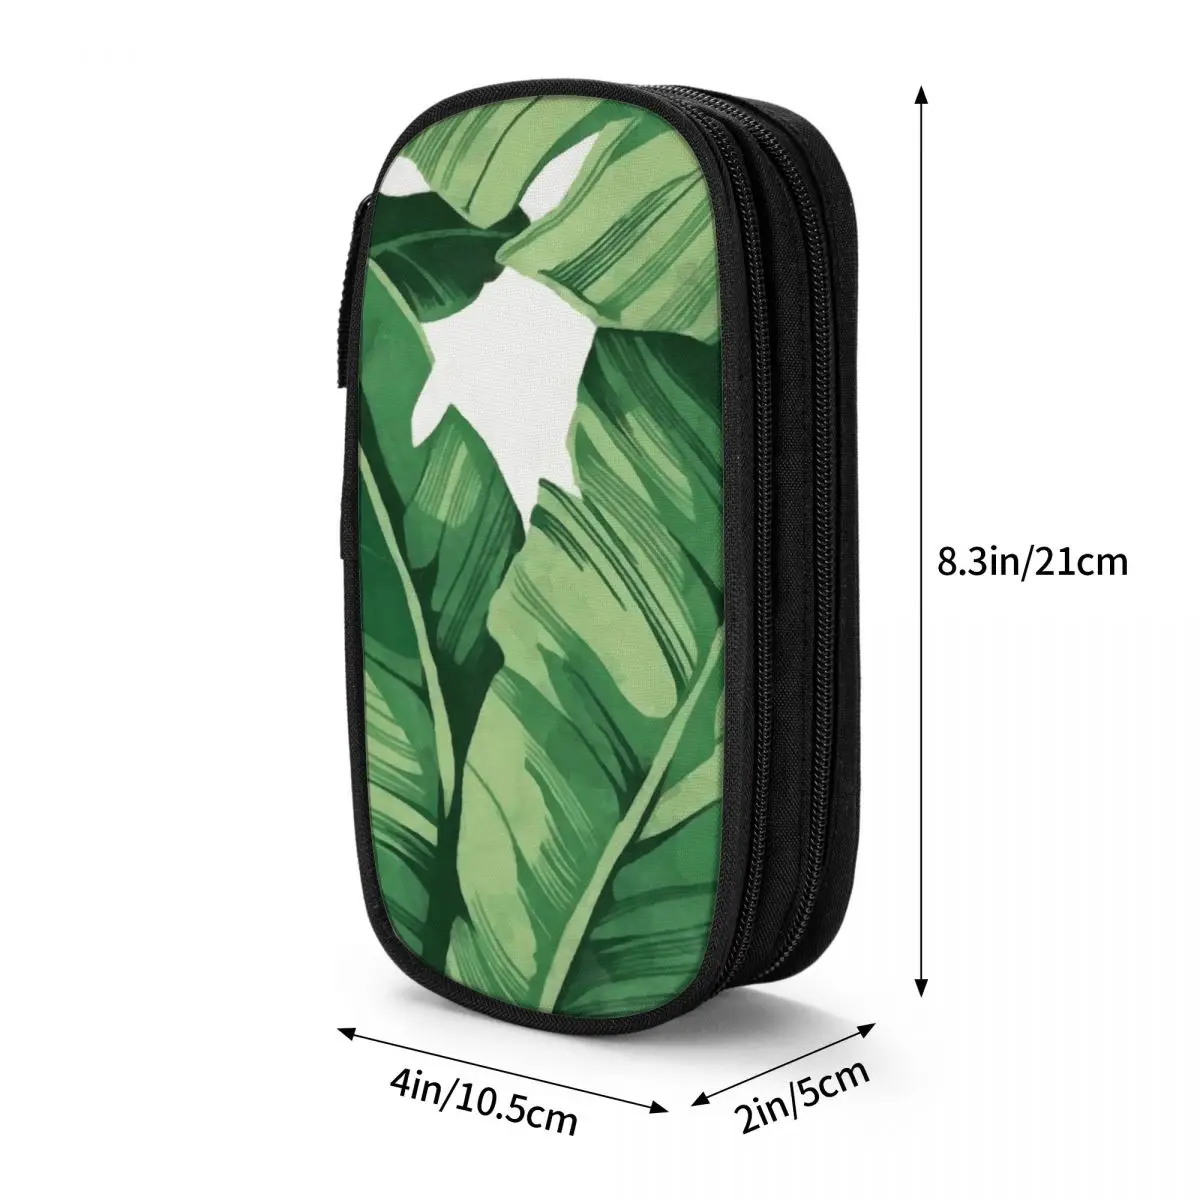 Tropical Hawaiian Forest, Luggage Suitcase Cover